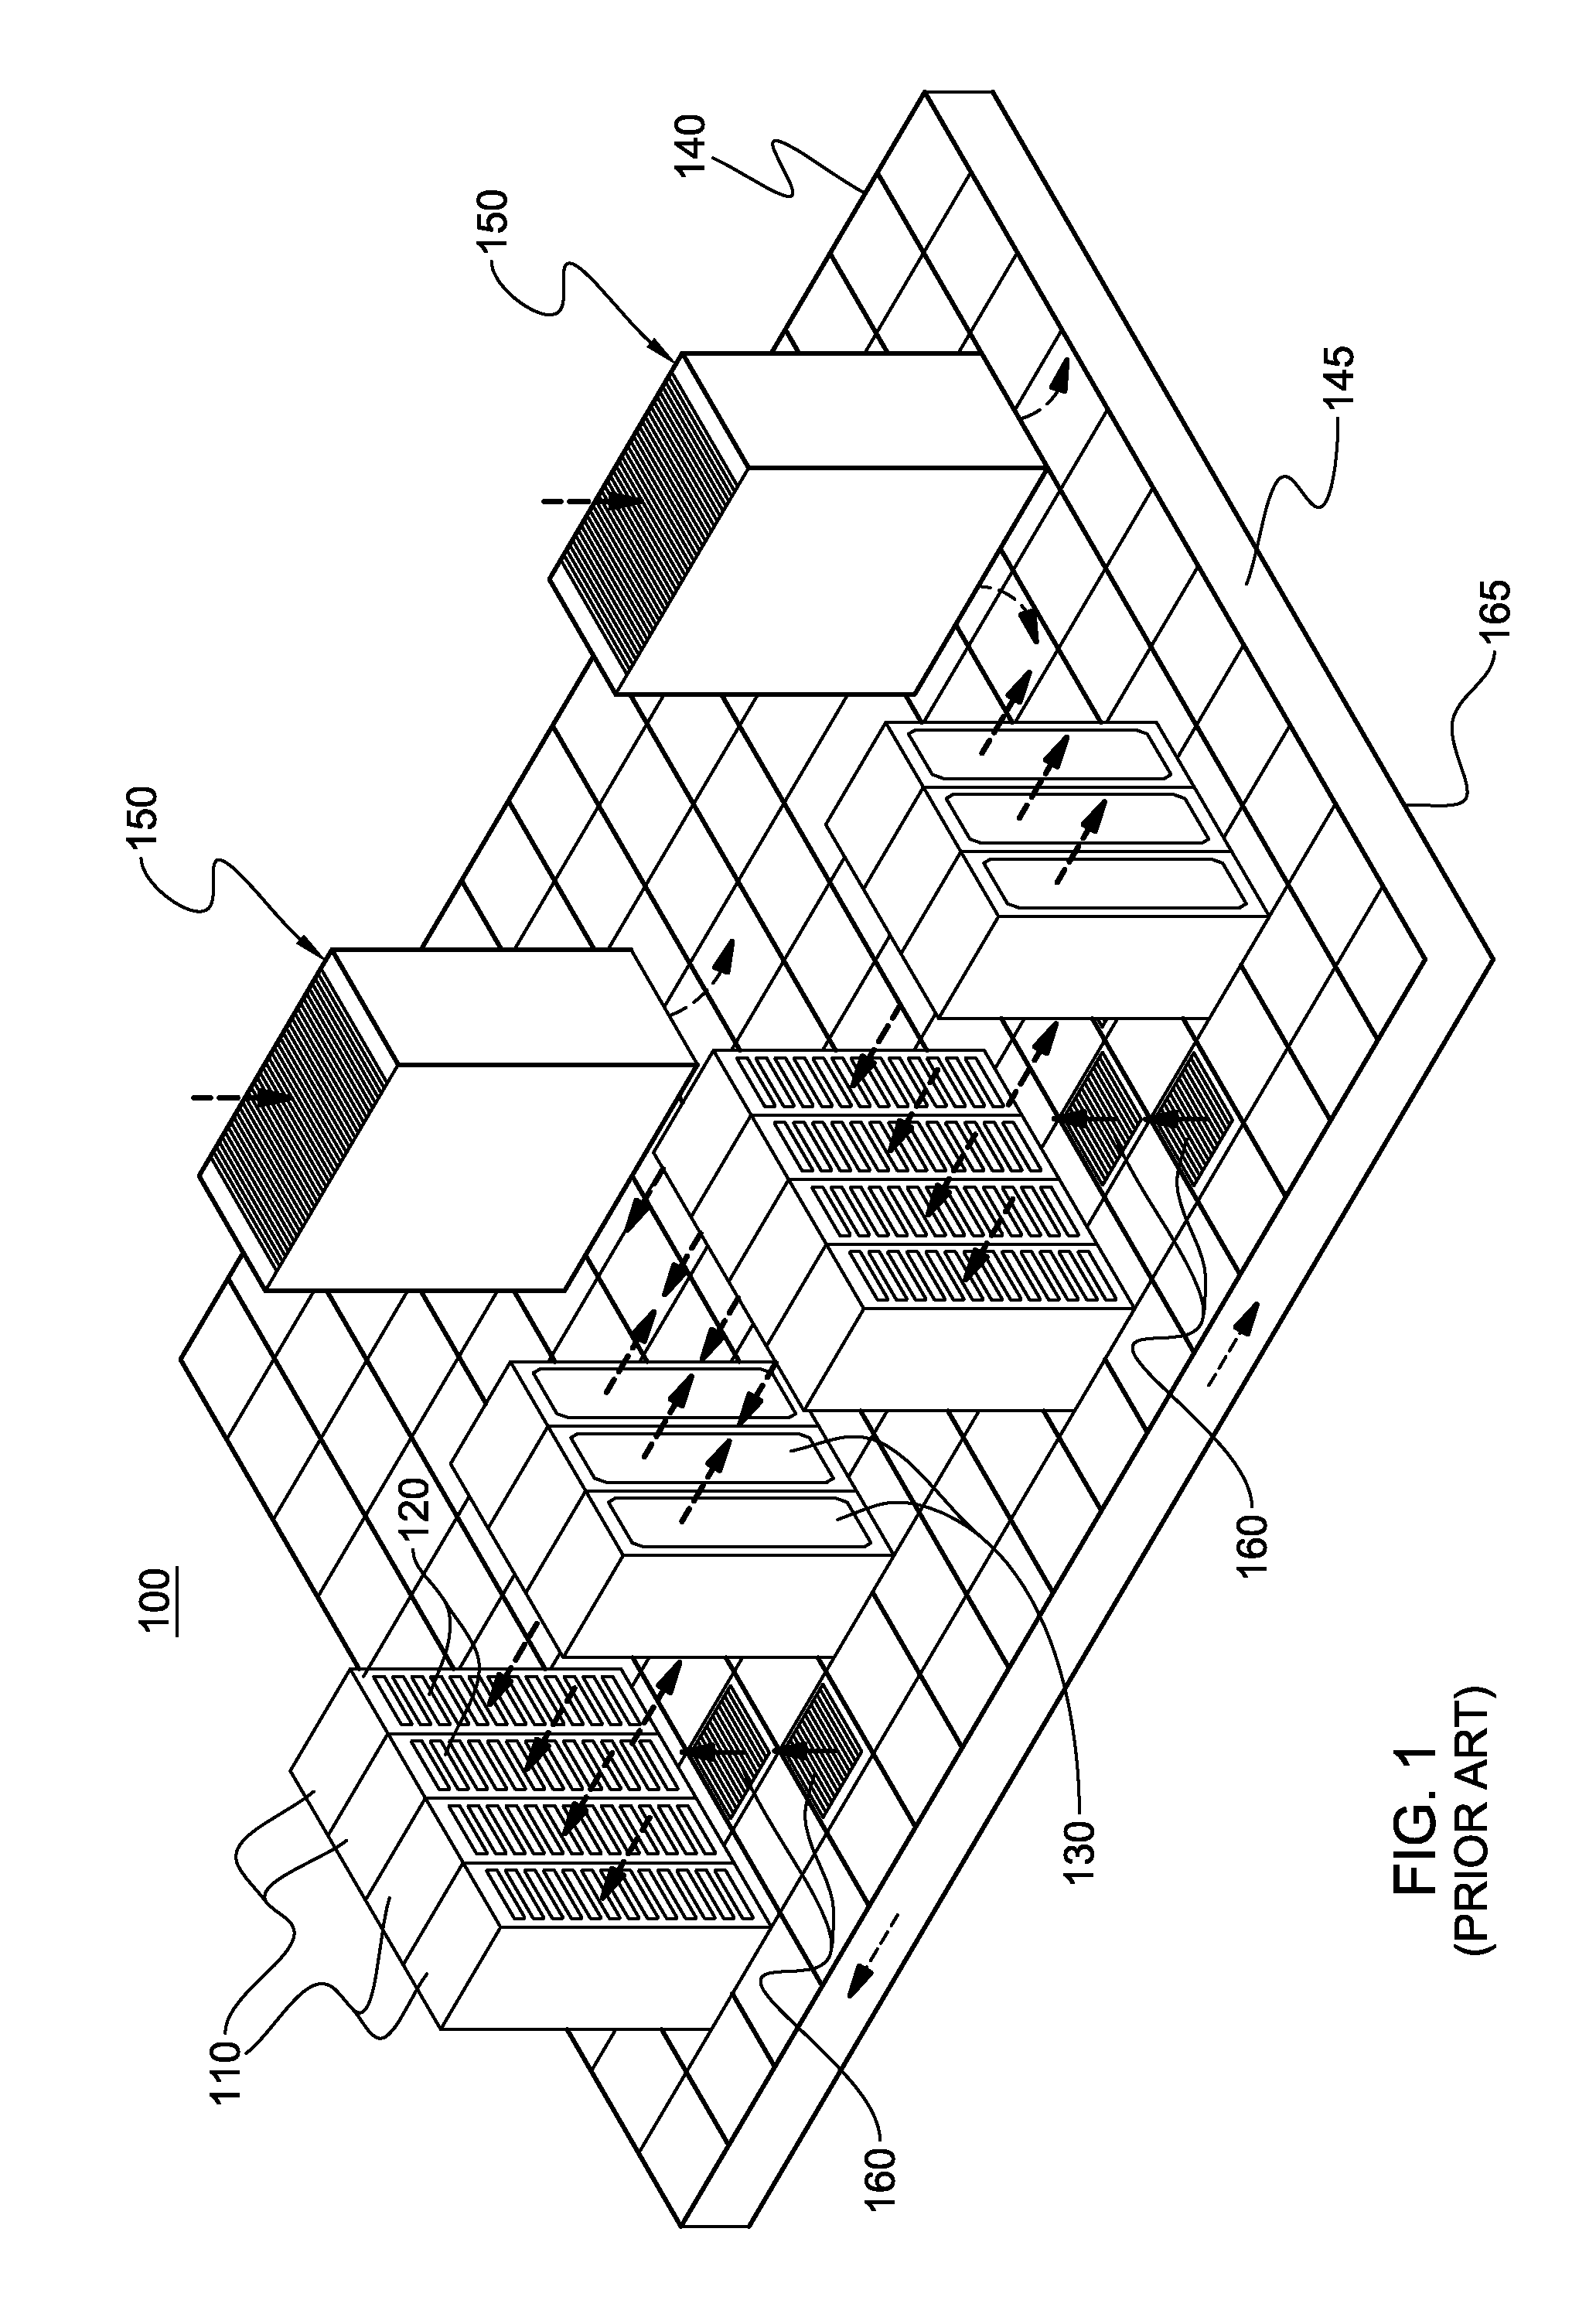 Vapor condenser with three-dimensional folded structure